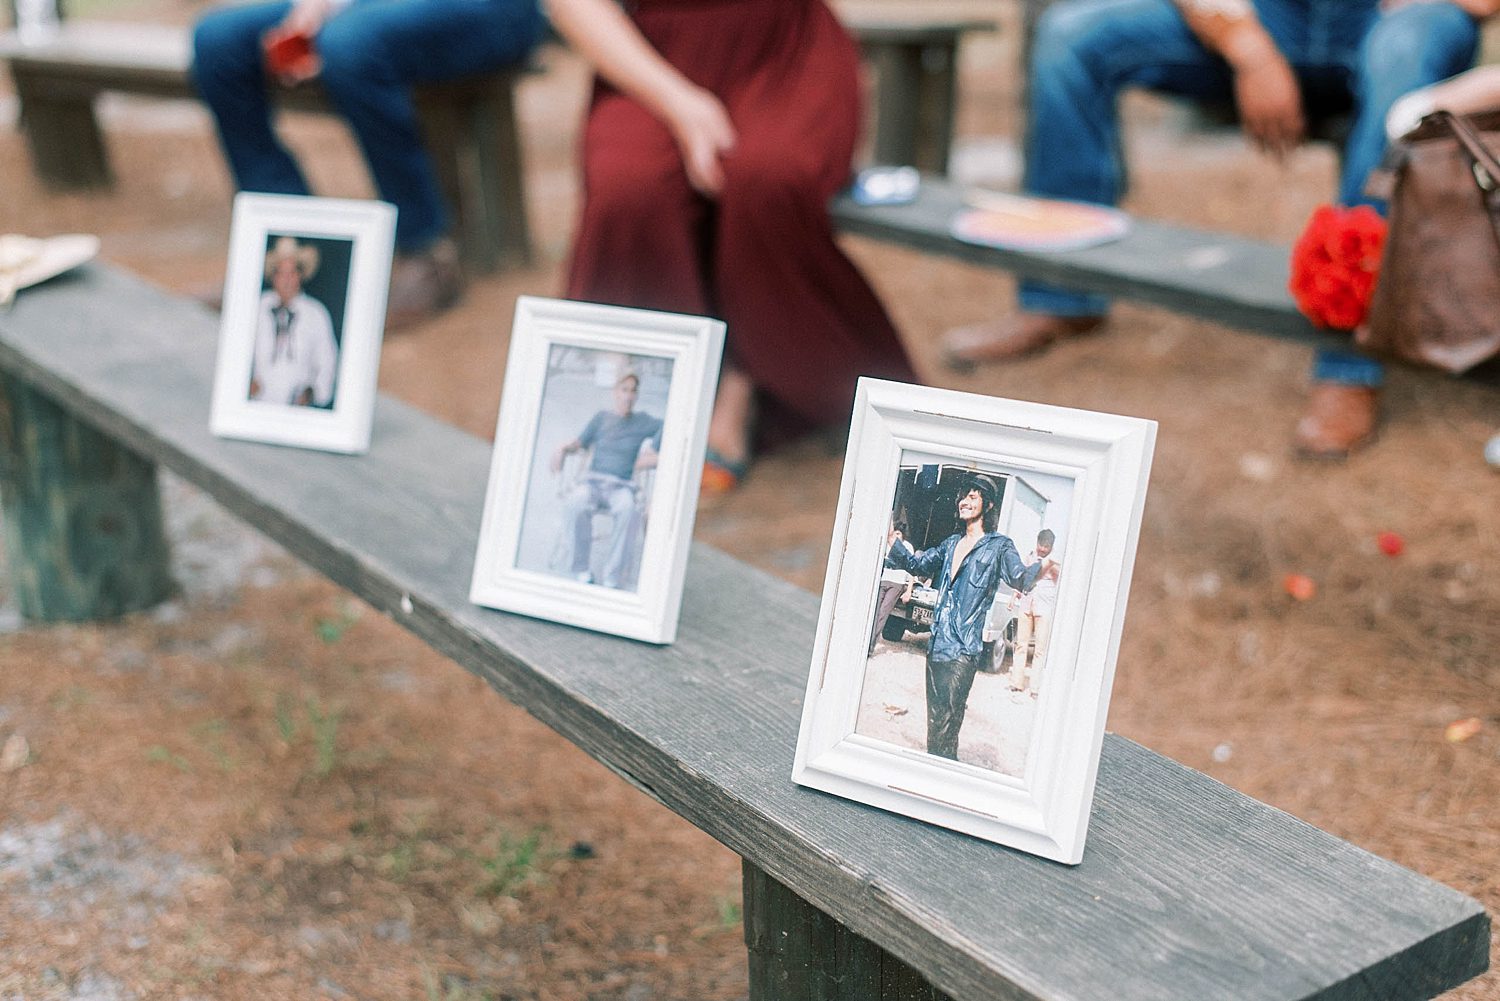 photos on display for family members unable to attend wedding